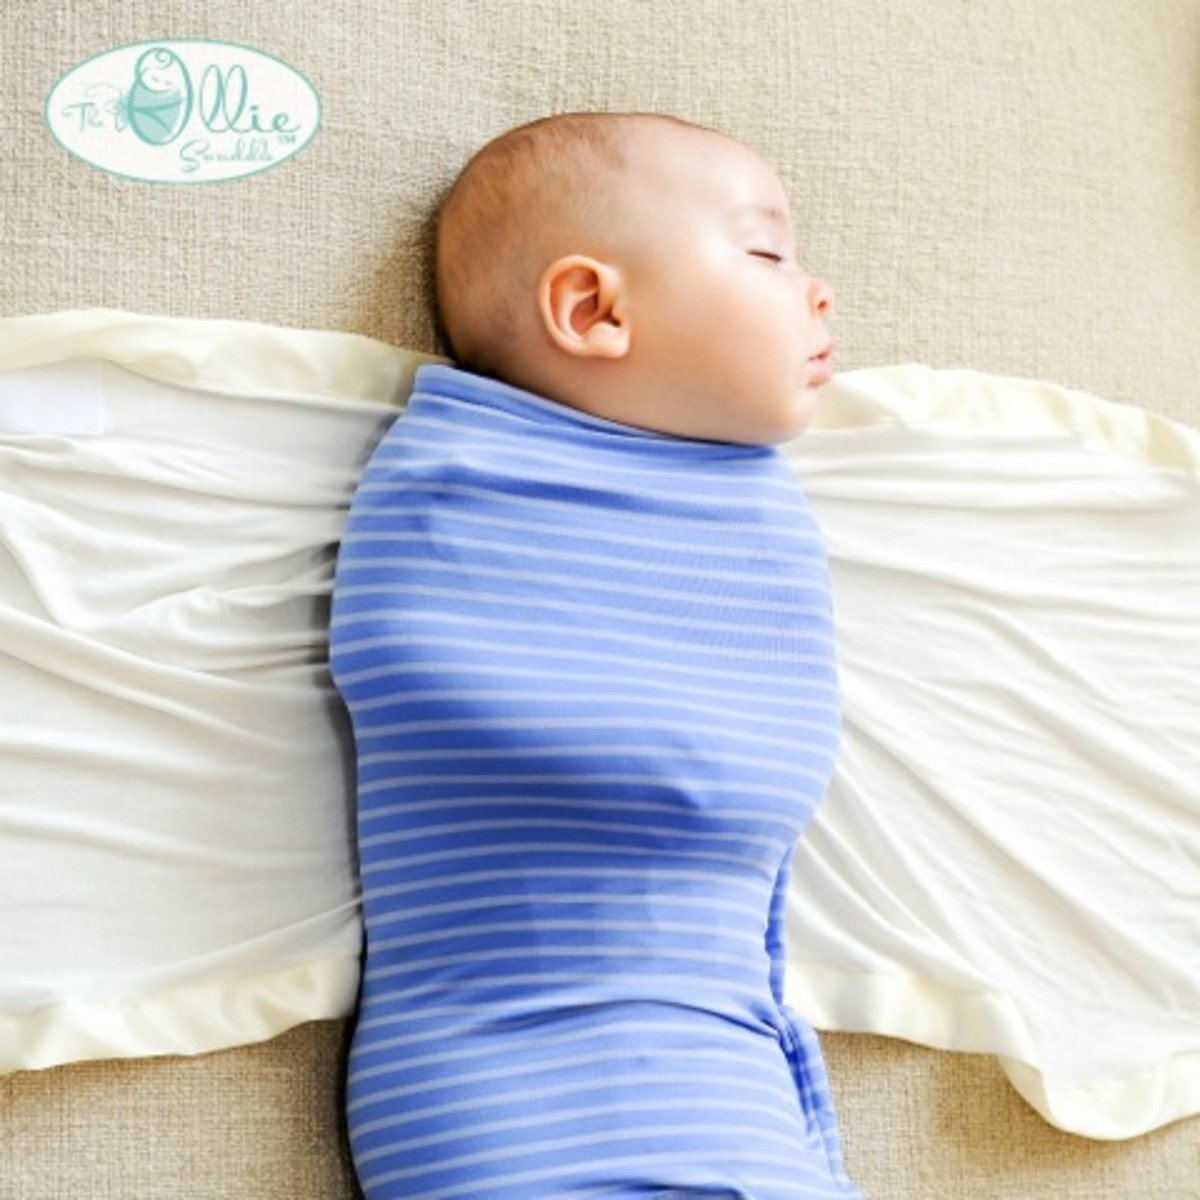 Ollie Swaddle